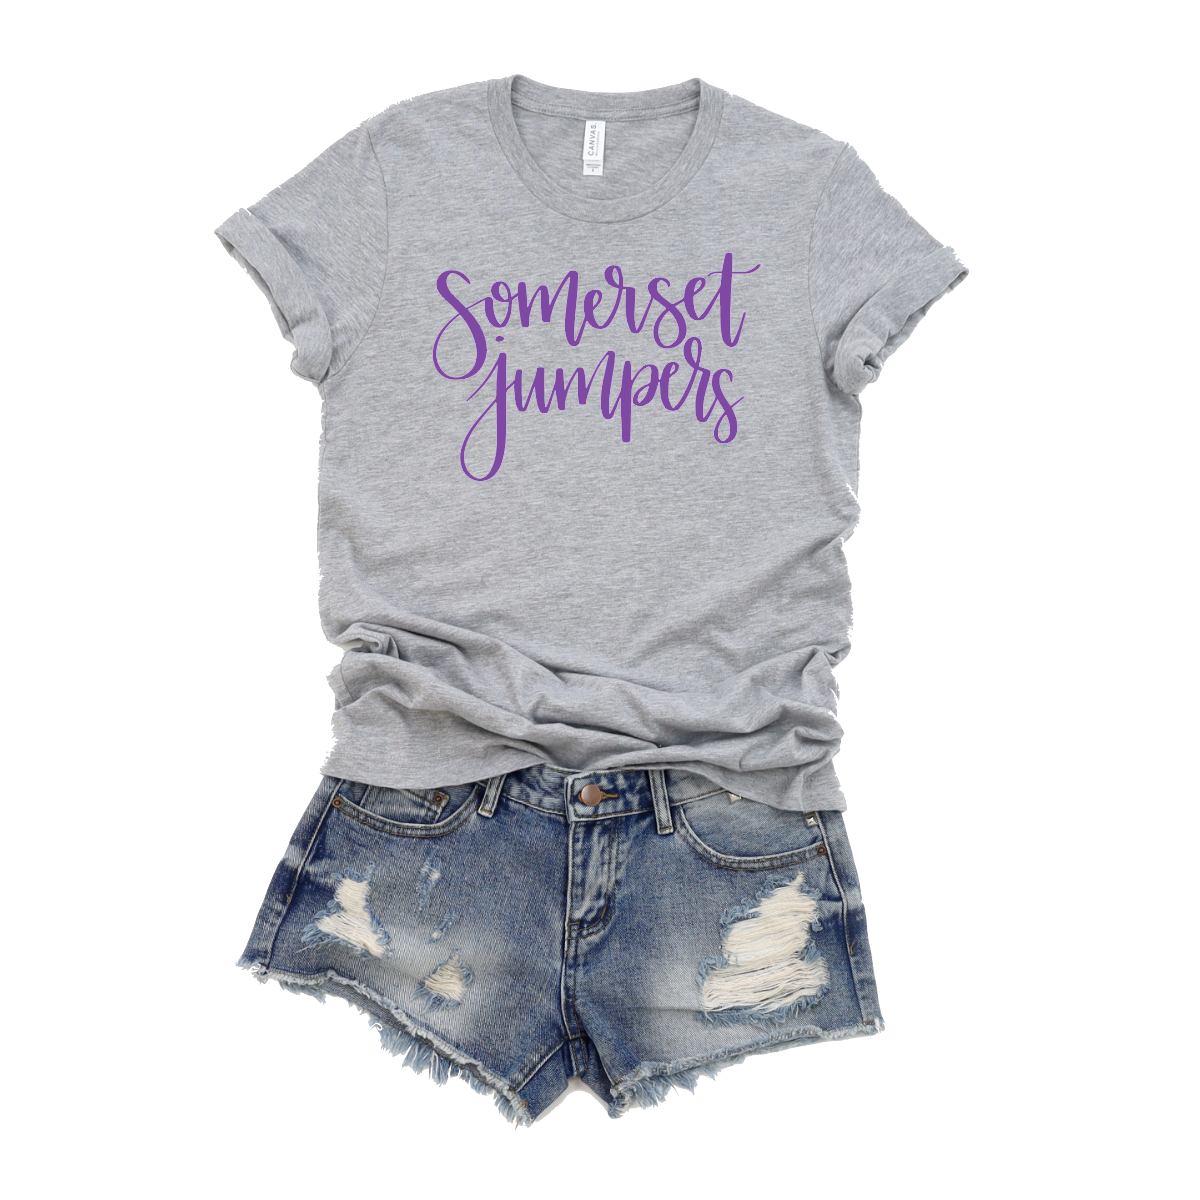 Somerset Hand Lettered Tee (Youth & Adult)